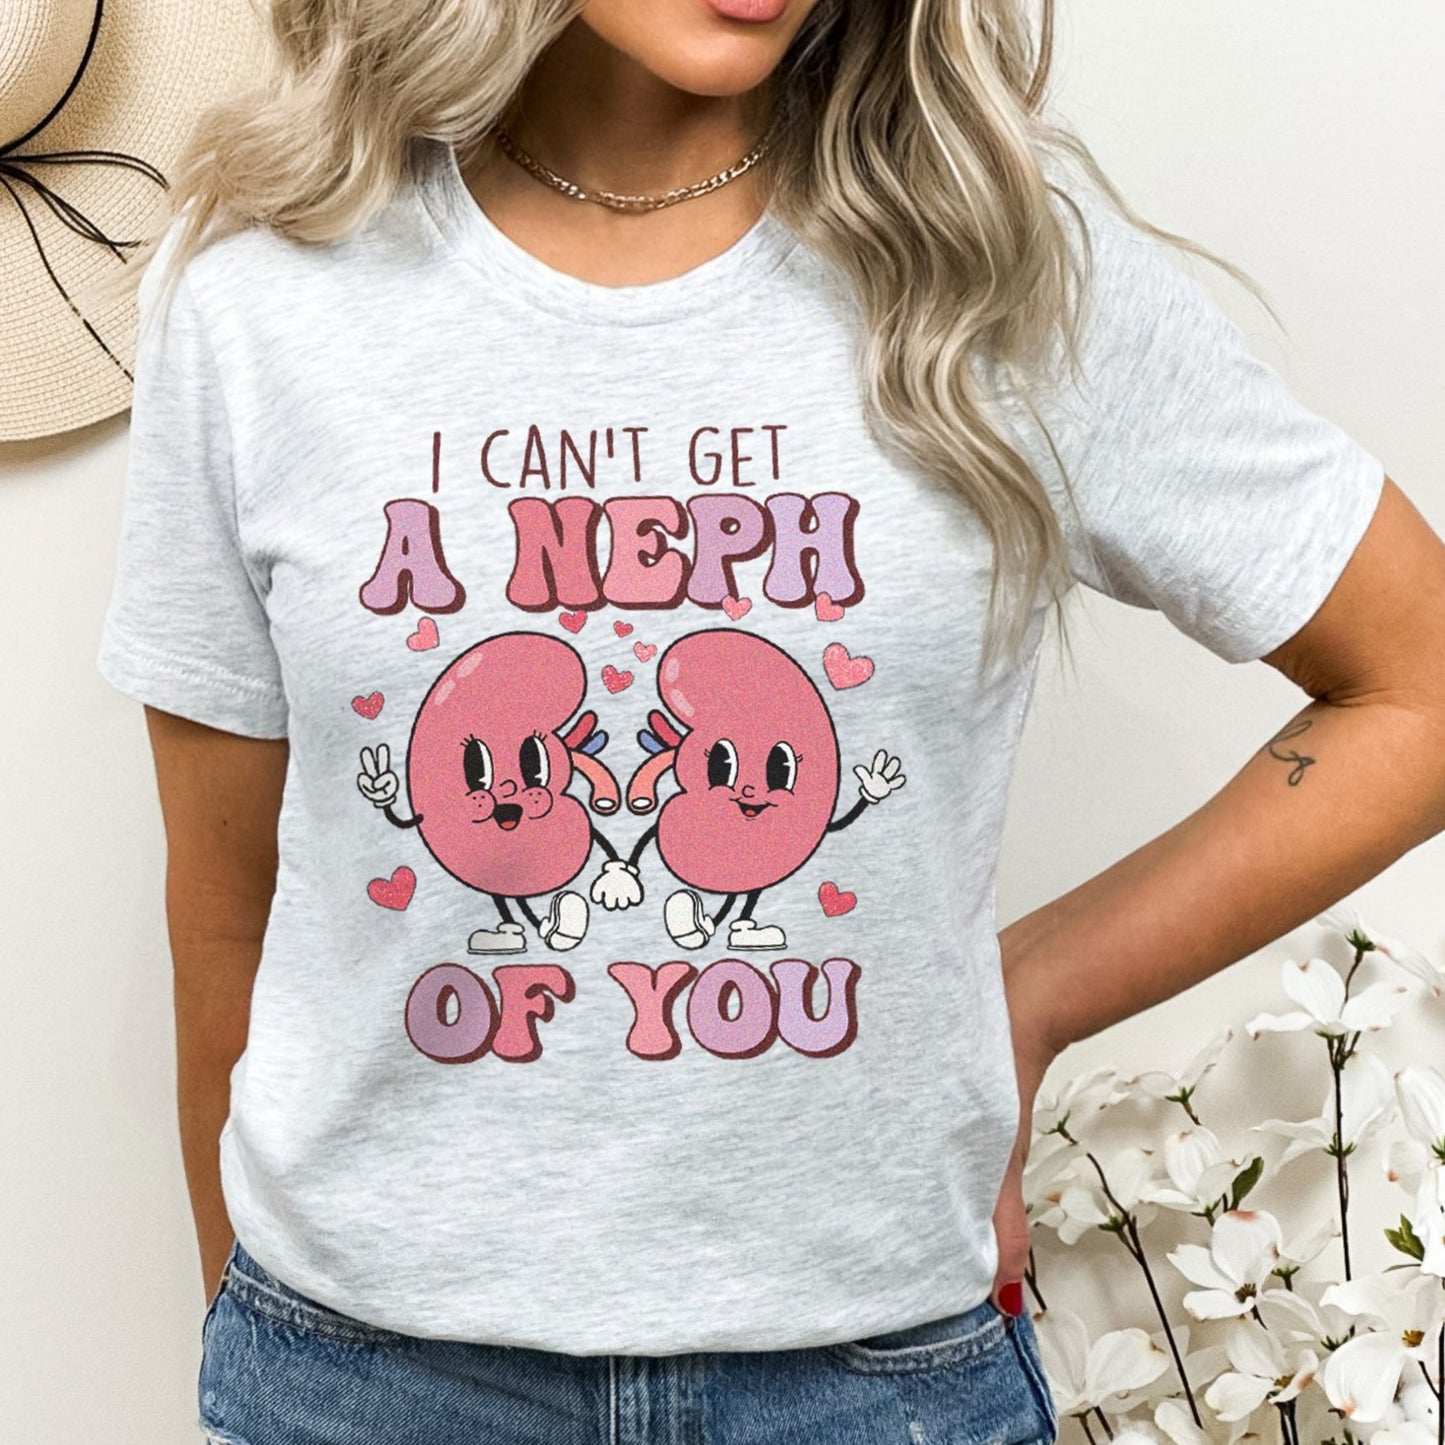 Can't Get A Neph of You T-Shirt